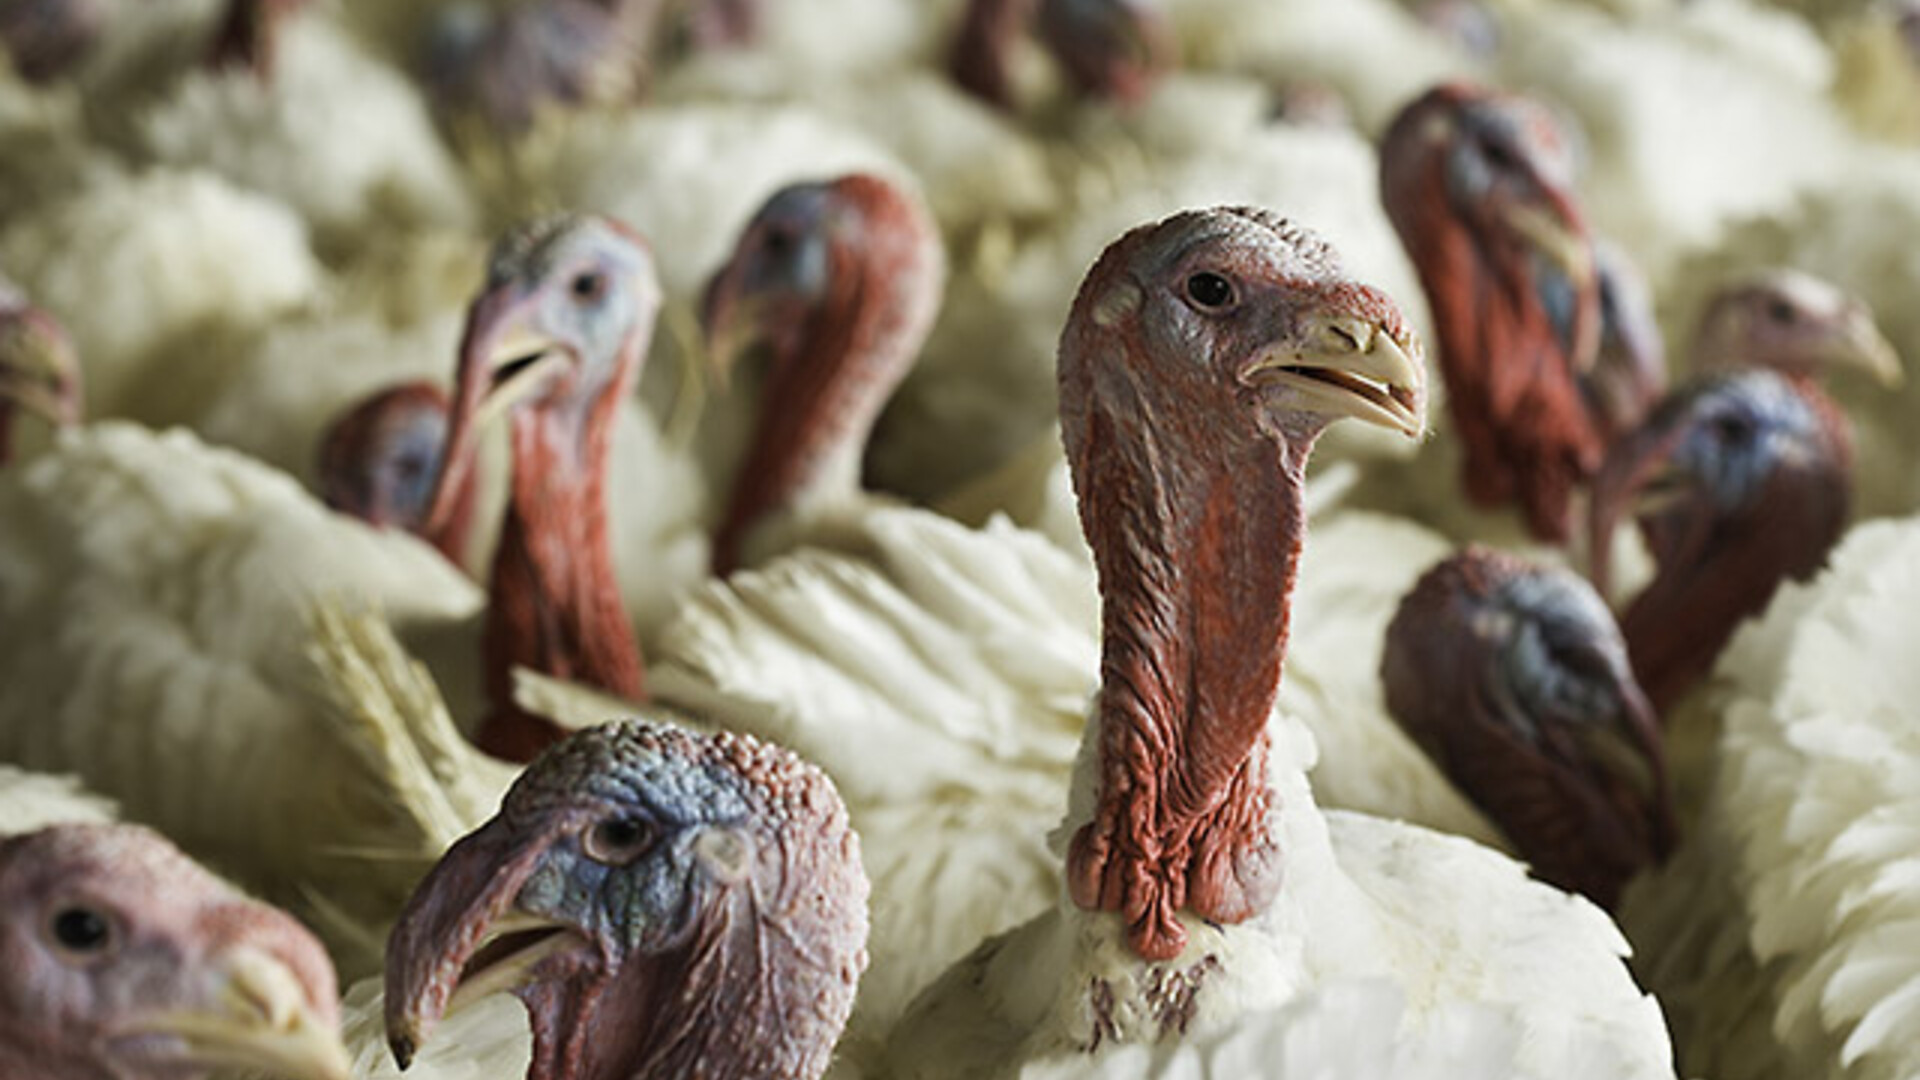 Ringing in the Holidays with Record Turkey & Egg Prices